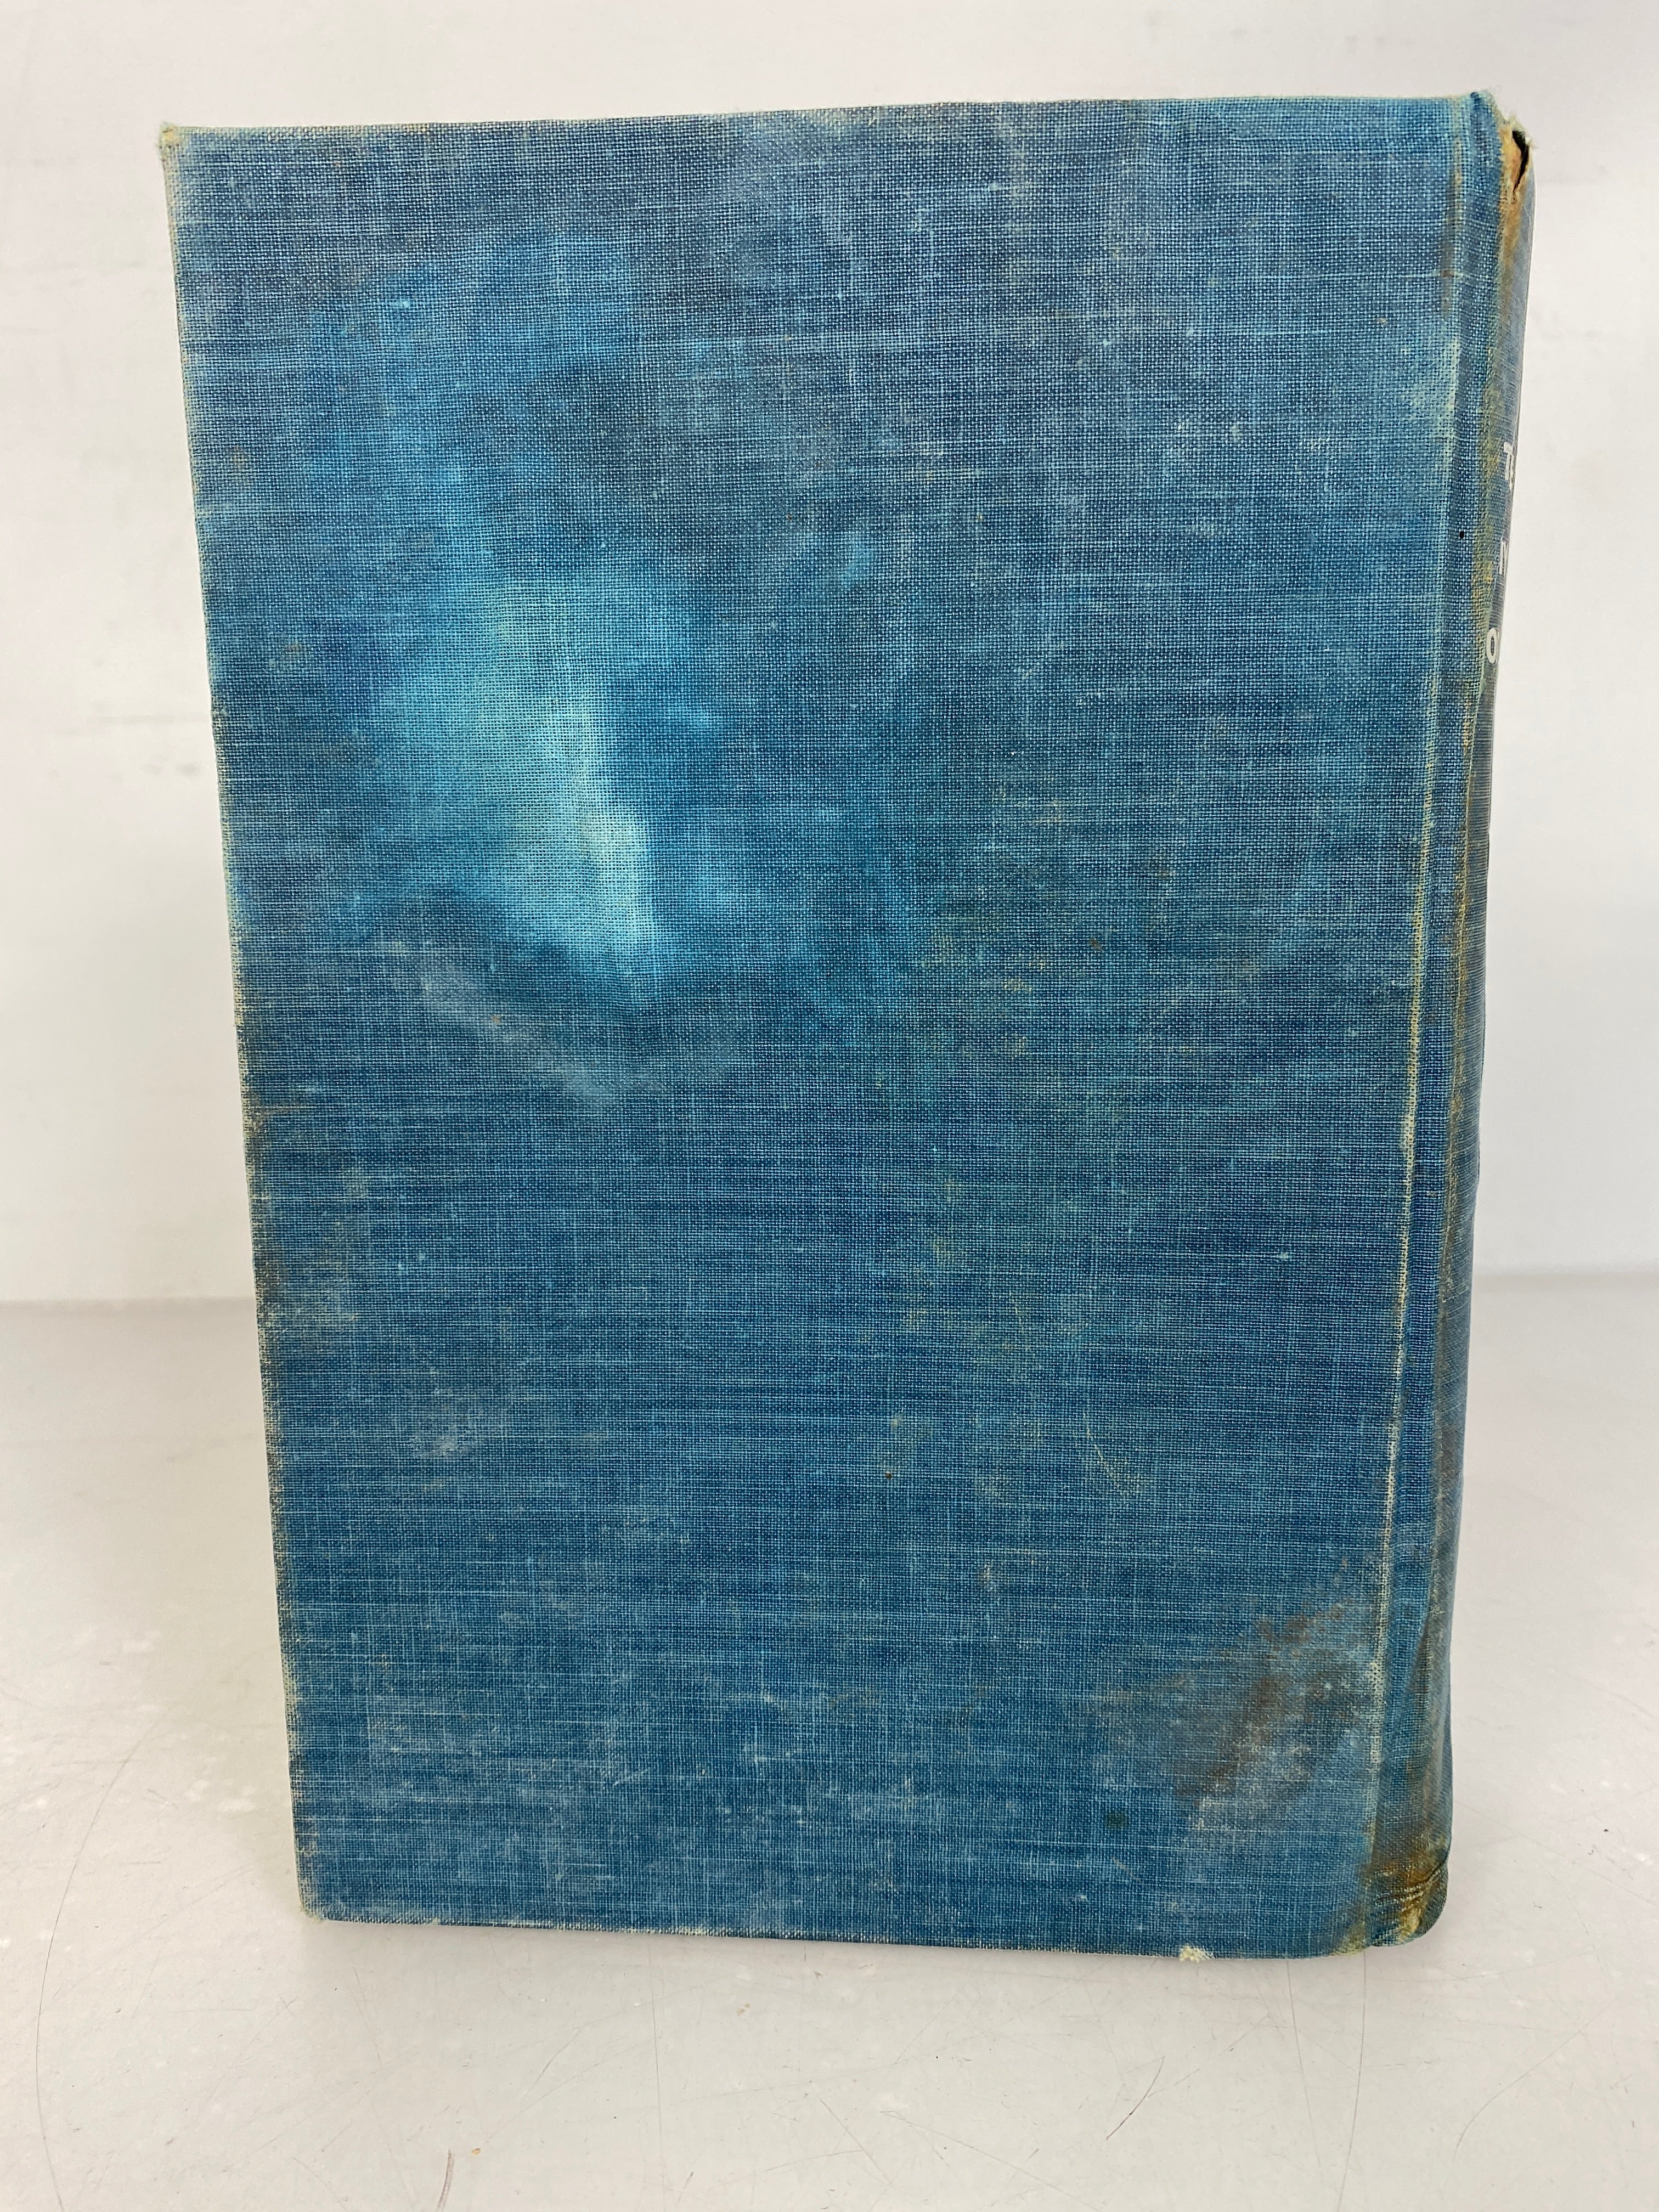 The Mystery of Matter by Louise Young Second Printing 1966 HC